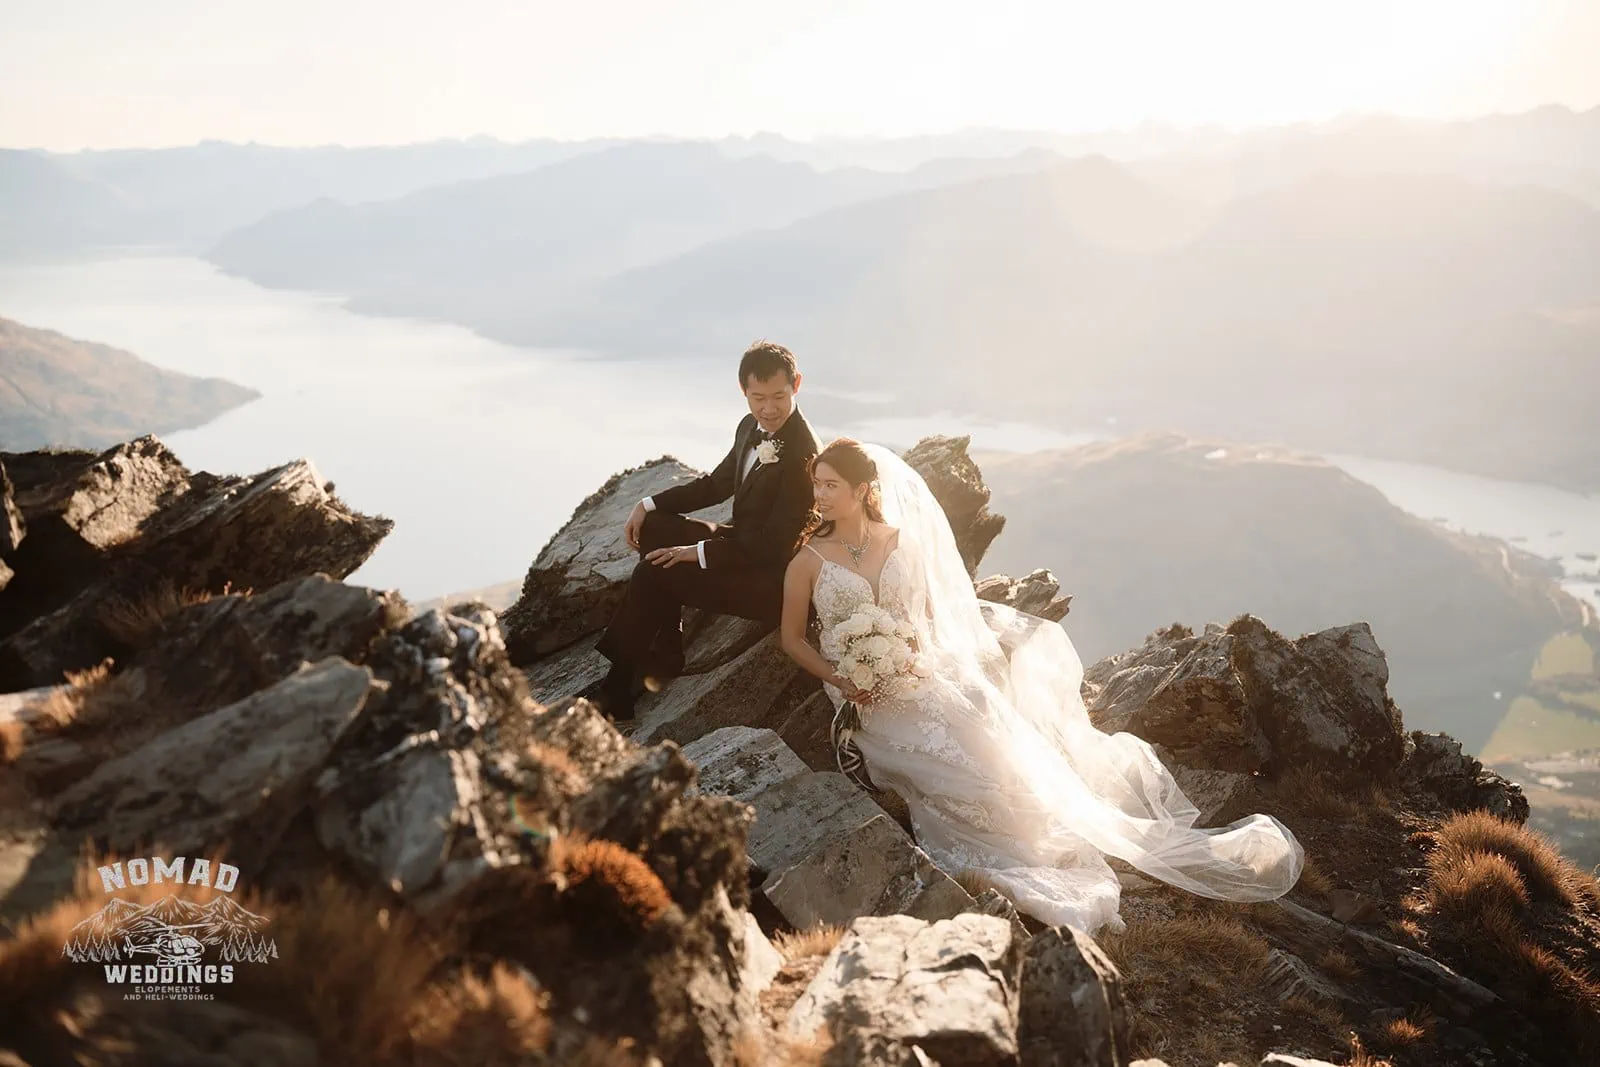 Connie and Andrew enjoying a Remarkables Heli Pre Wedding Shoot on top of a mountain overlooking Lake Wanaka.